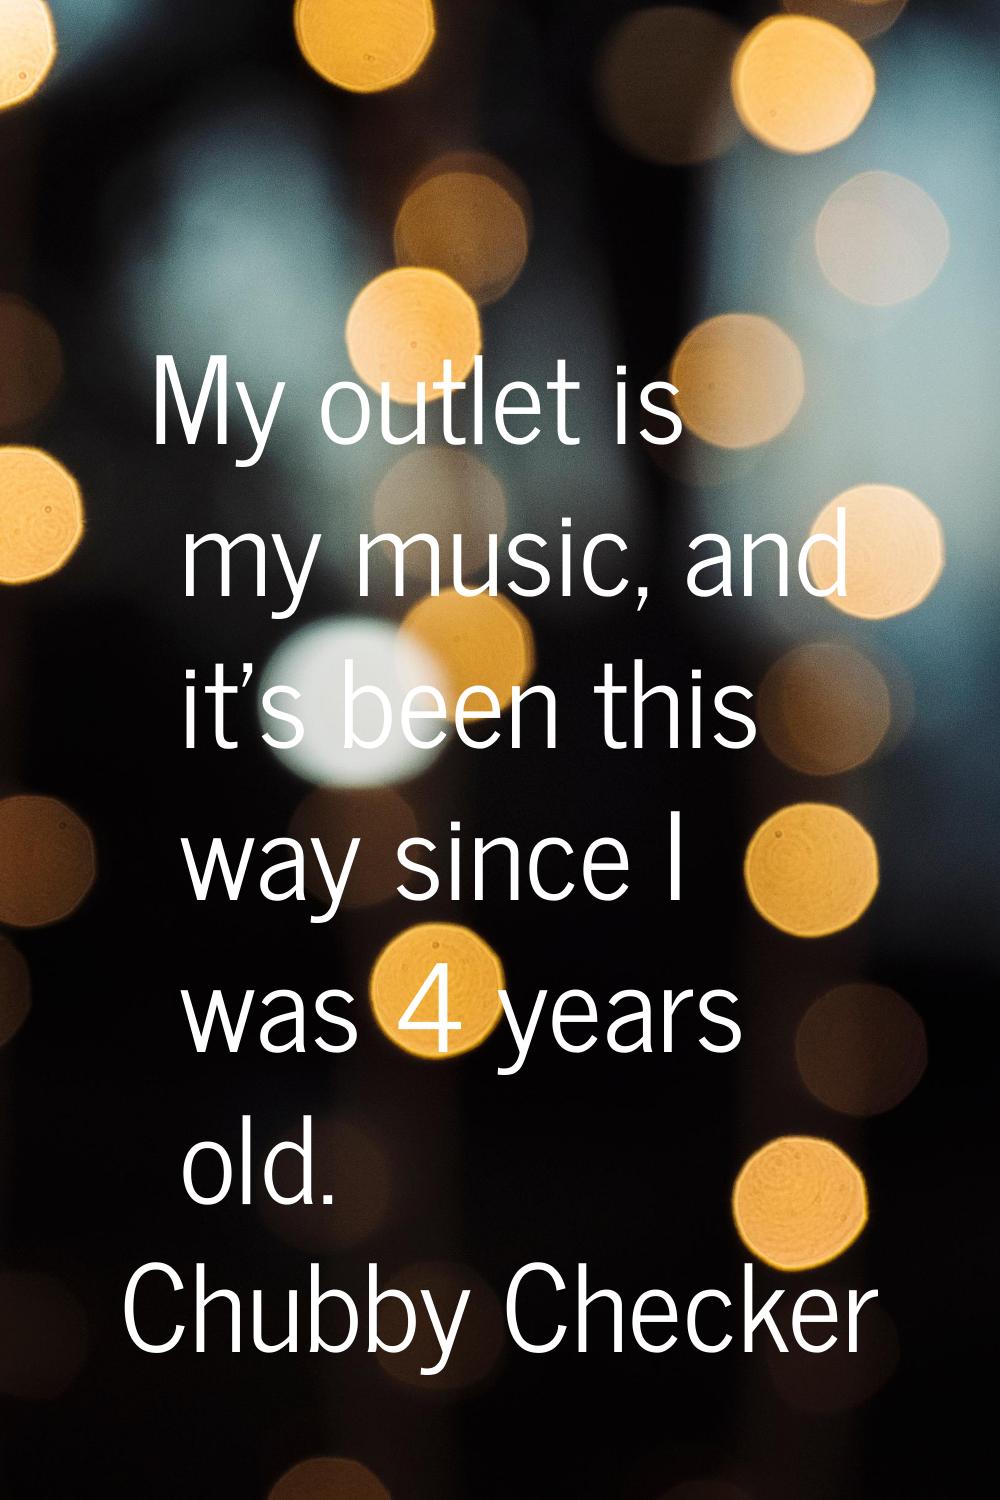 My outlet is my music, and it's been this way since I was 4 years old.